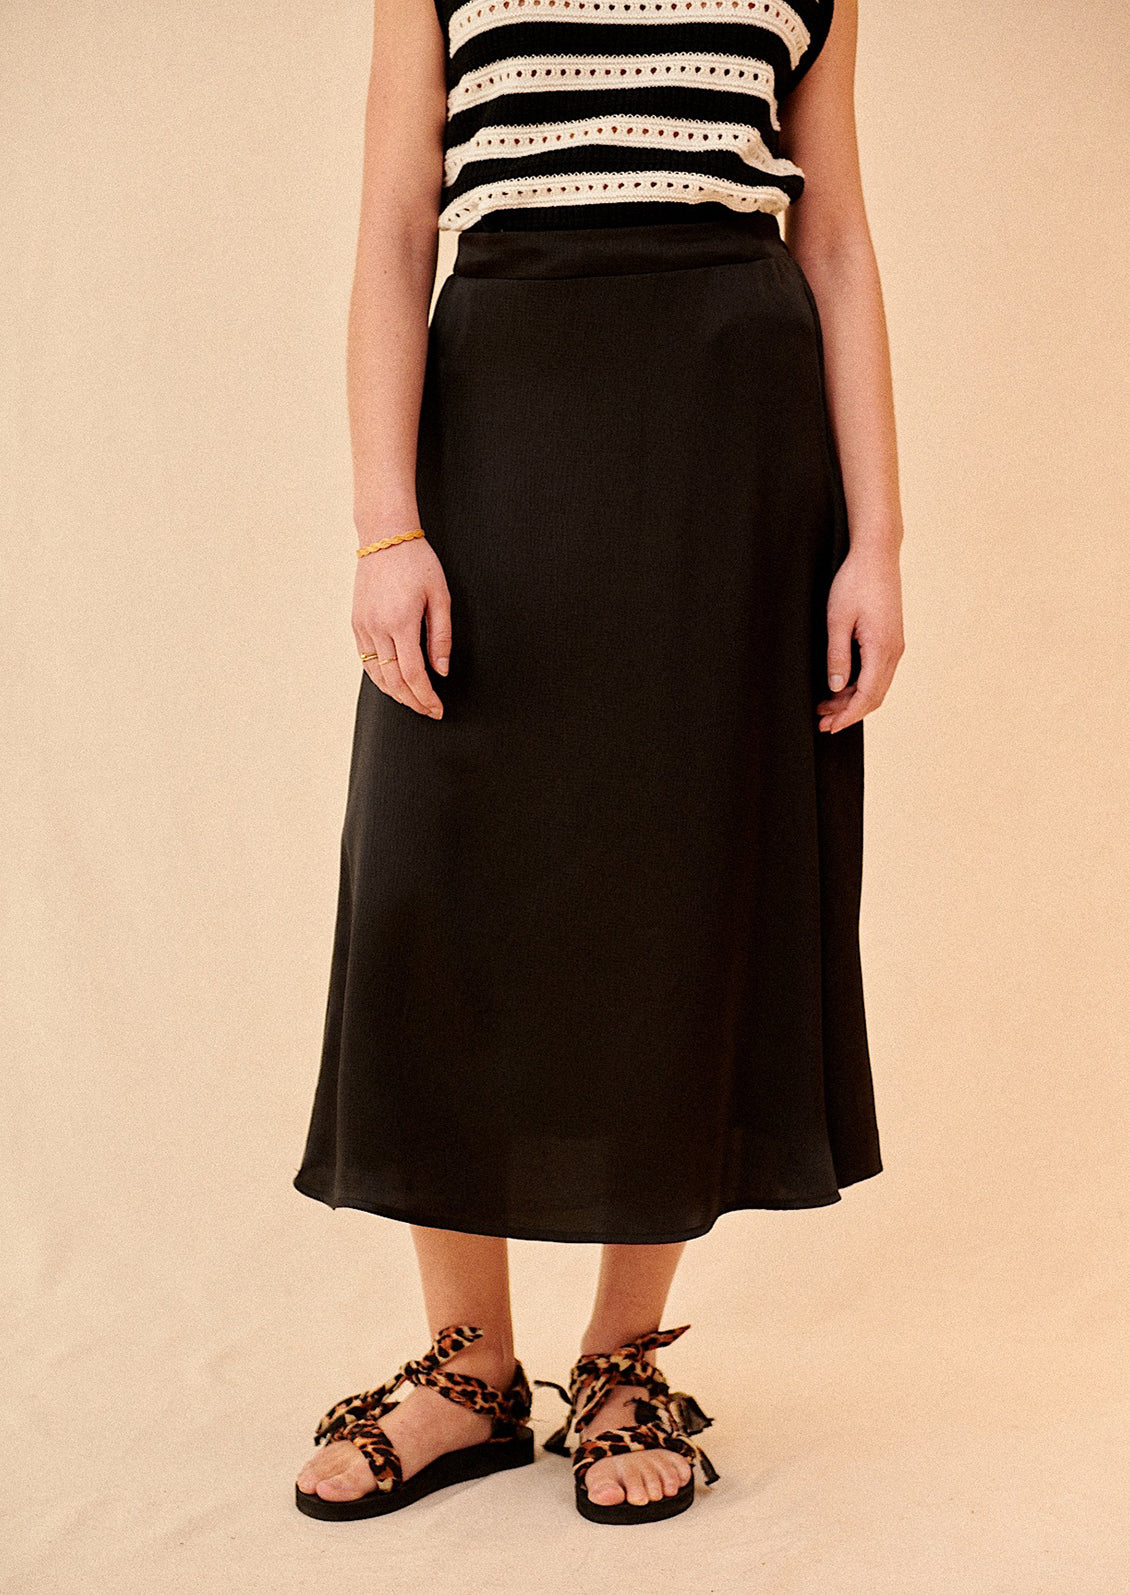 Woman wearing black midi skirt and sandals. 